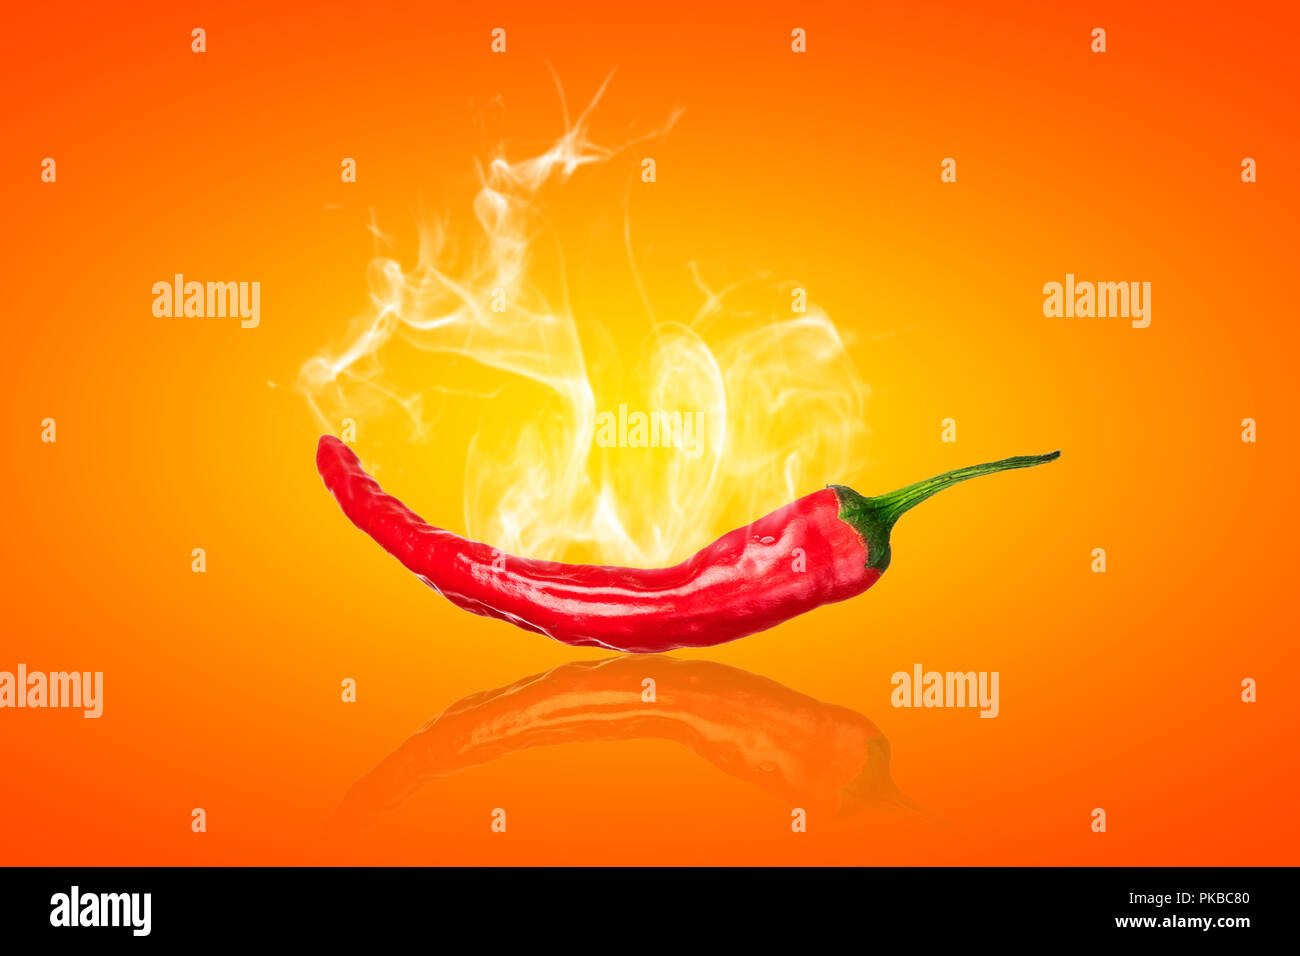 single red chili peppers  with white smoke on orange background Stock Photo